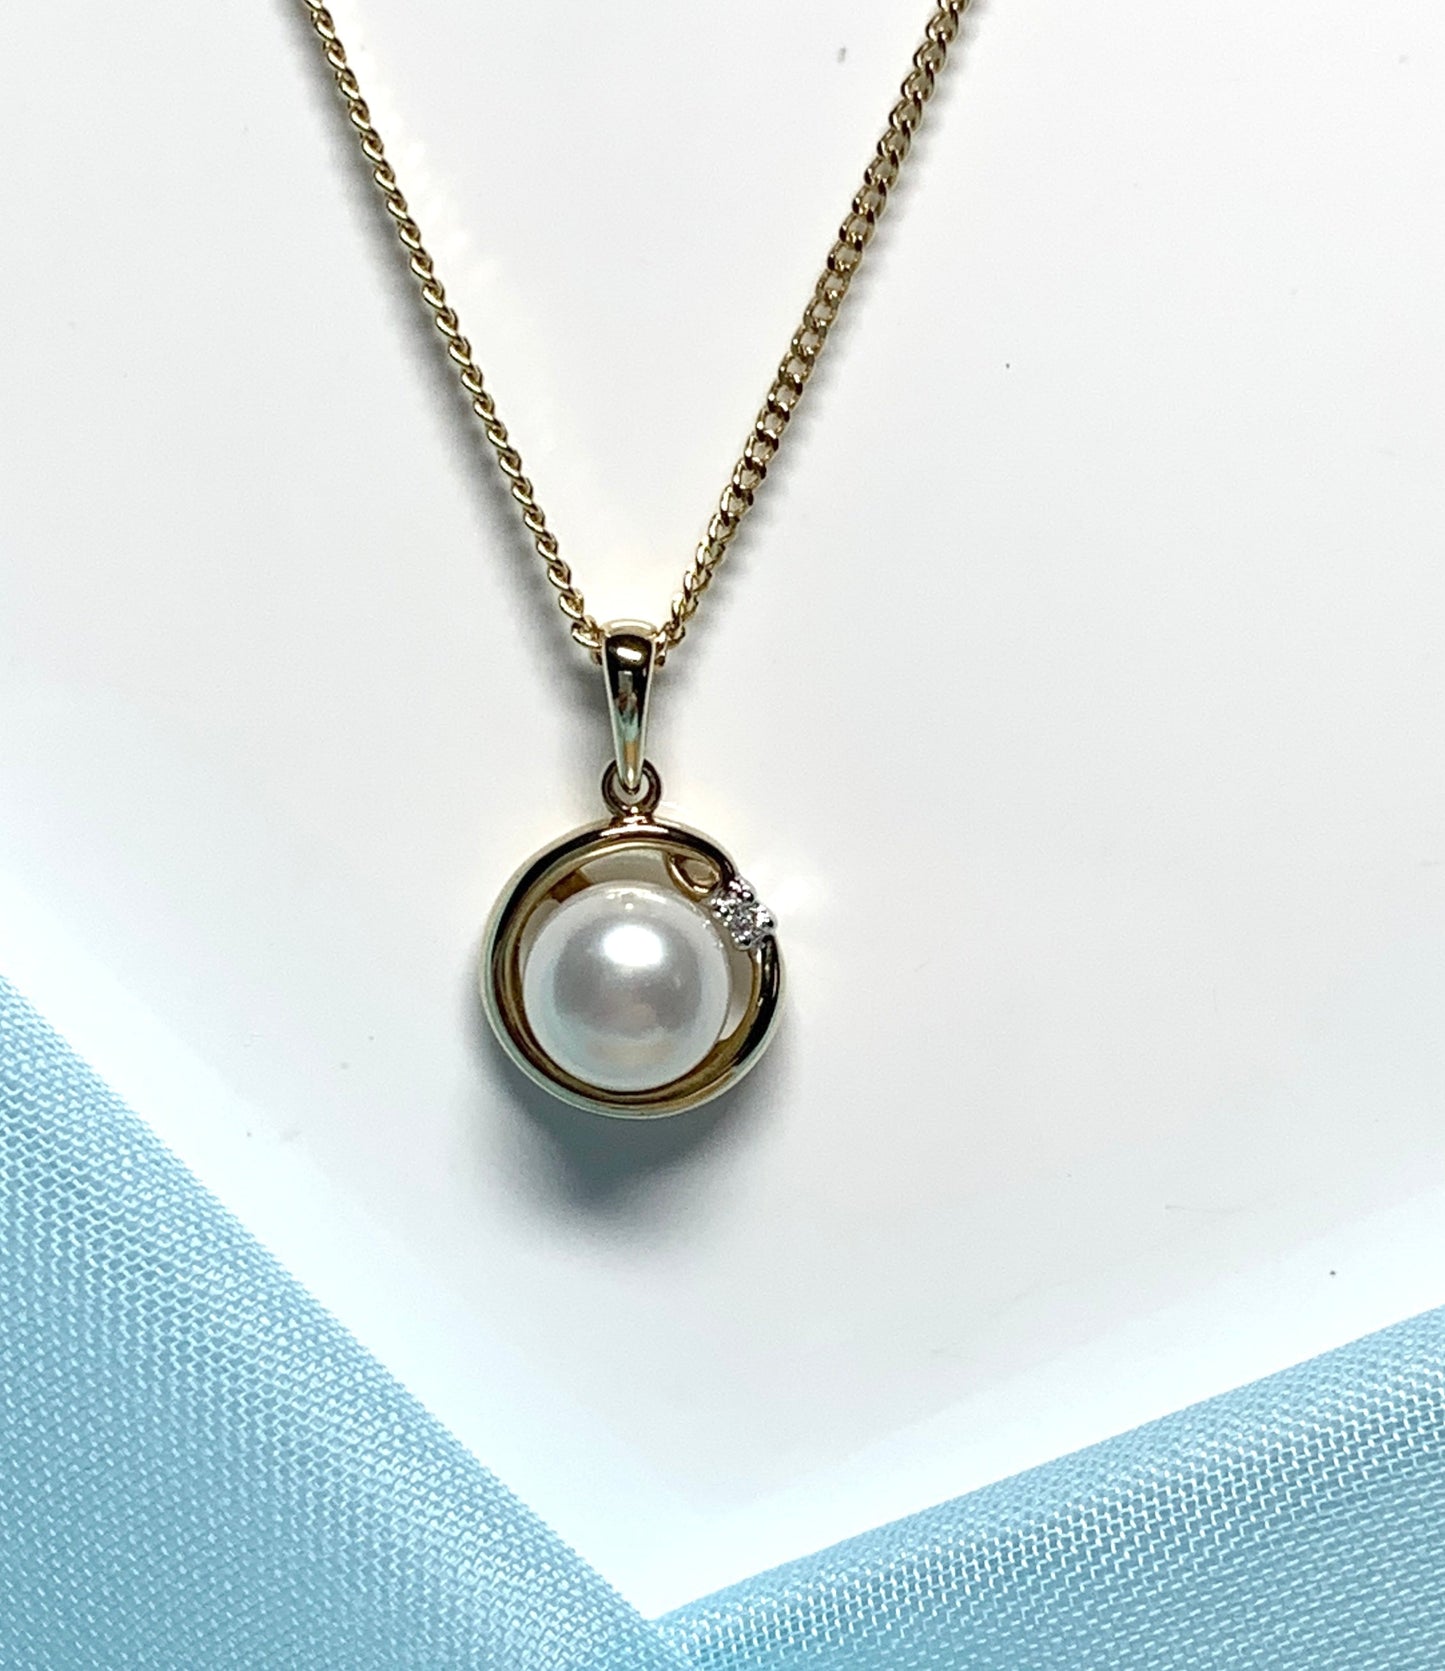 Real pearl and diamond necklace freshwater cultured cubic zirconia yellow gold pendant